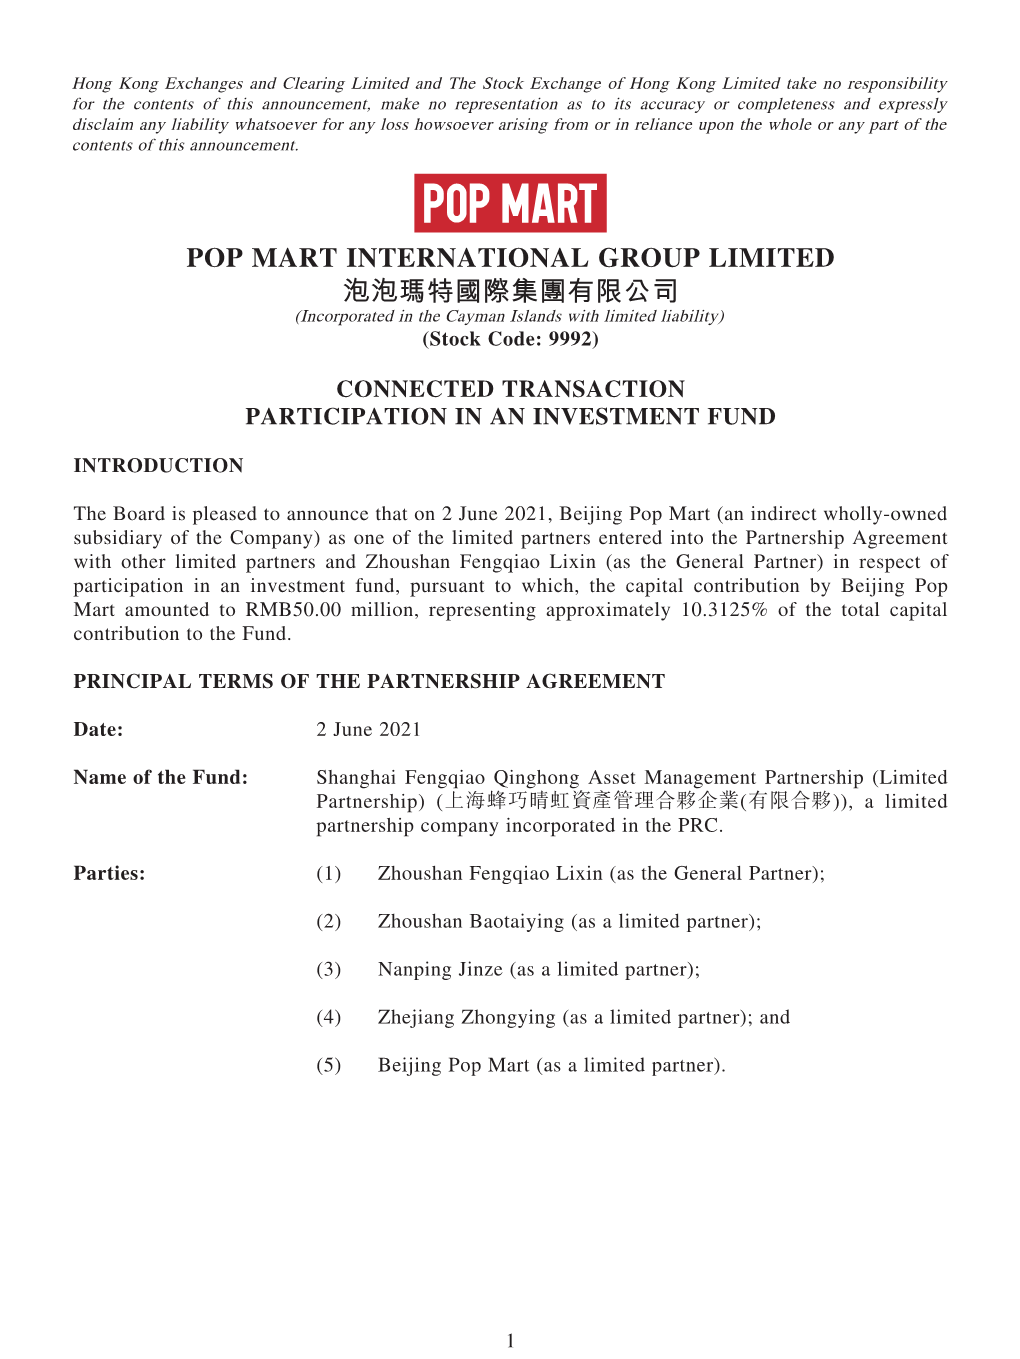 POP MART INTERNATIONAL GROUP LIMITED 泡泡瑪特國際集團有限公司 (Incorporated in the Cayman Islands with Limited Liability) (Stock Code: 9992)